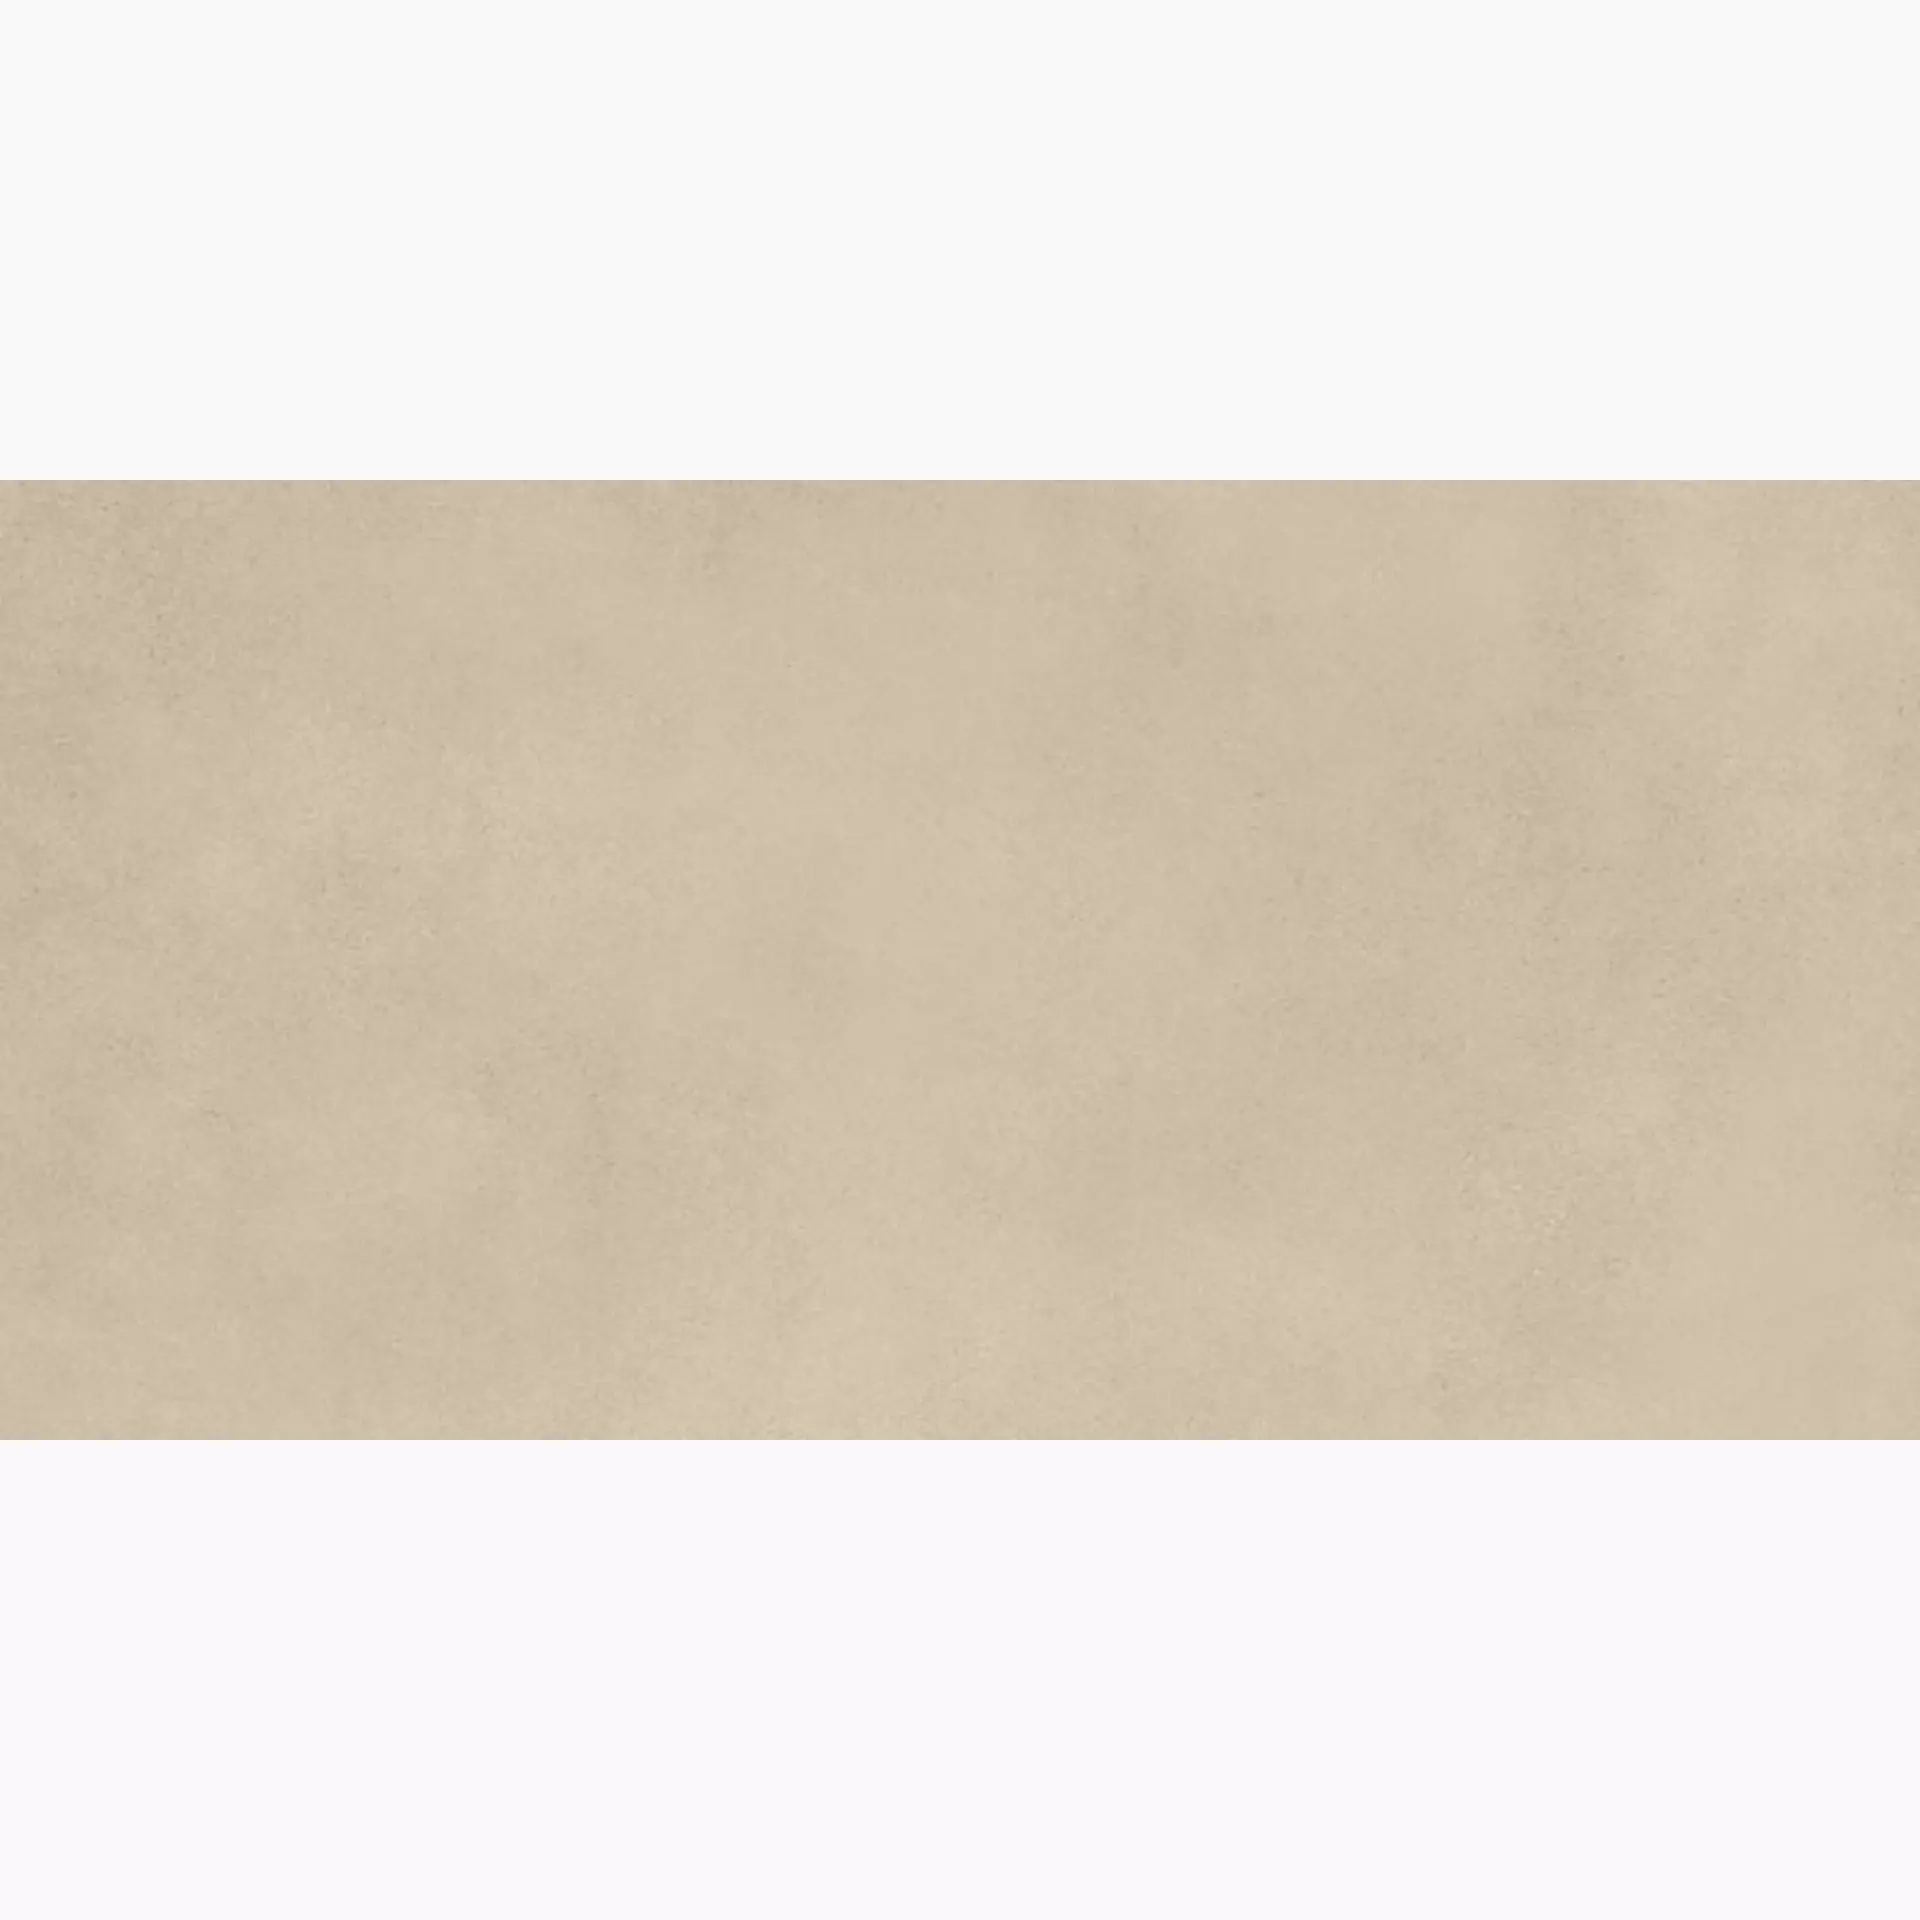 Sant Agostino Sable Beige Antislip CSASABE212 60x120cm rectified 20mm